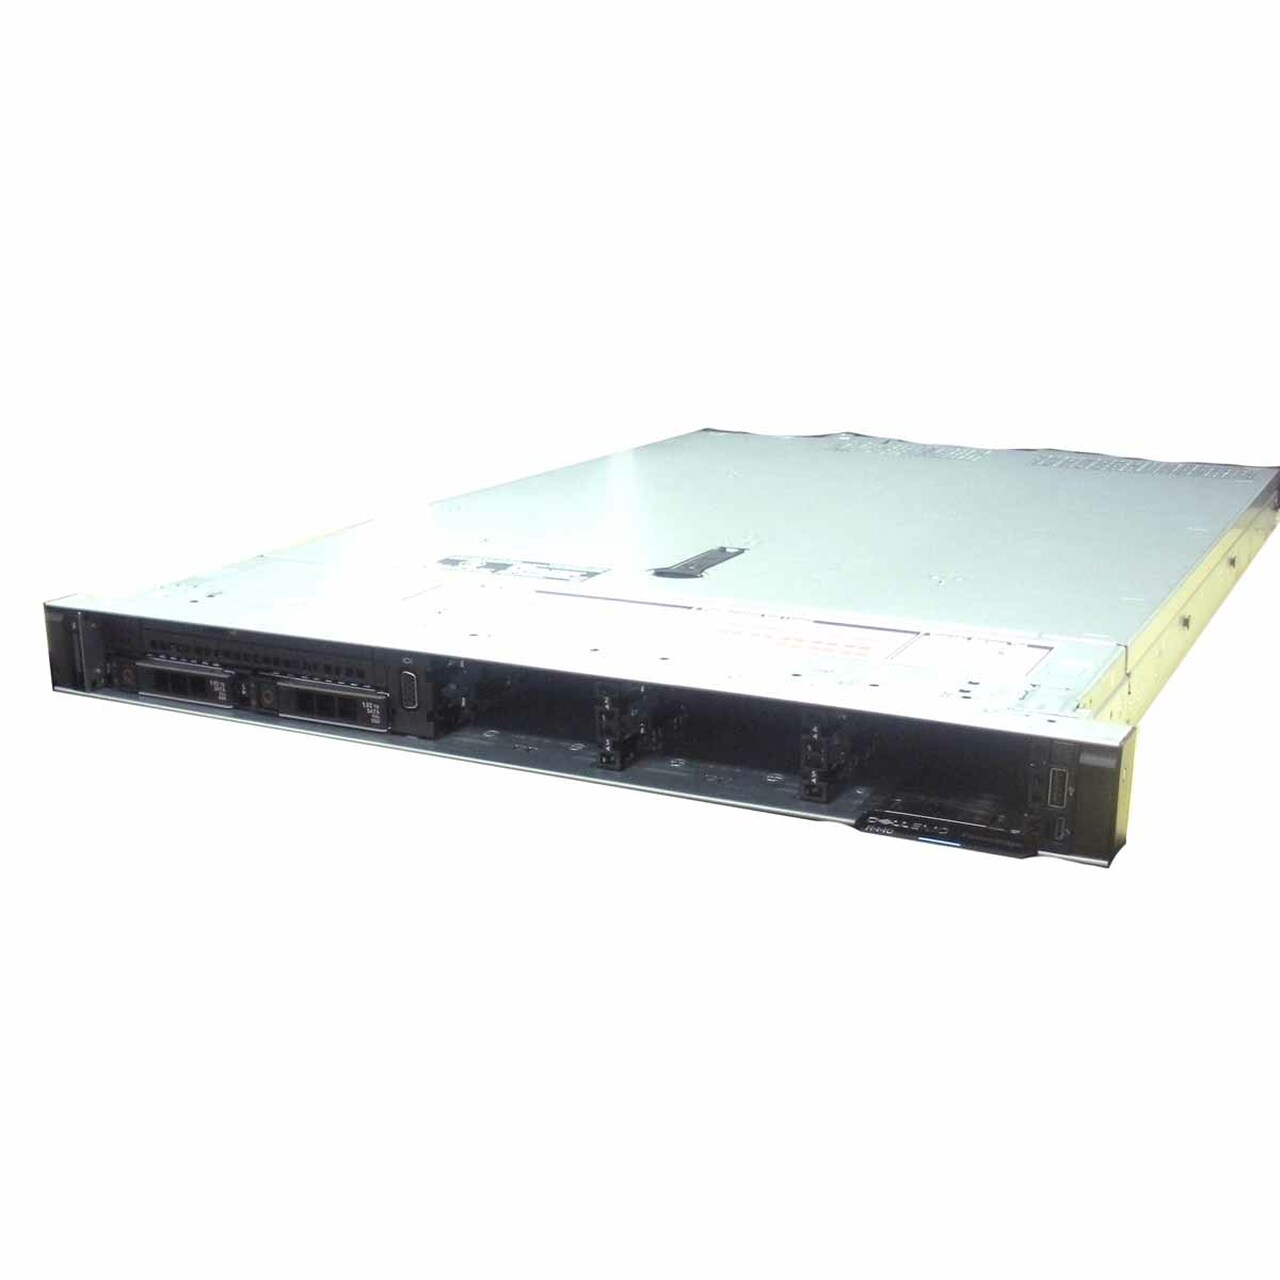 Save on Dell PowerEdge R440 Servers from your trusted partners at Flagship Technologies.